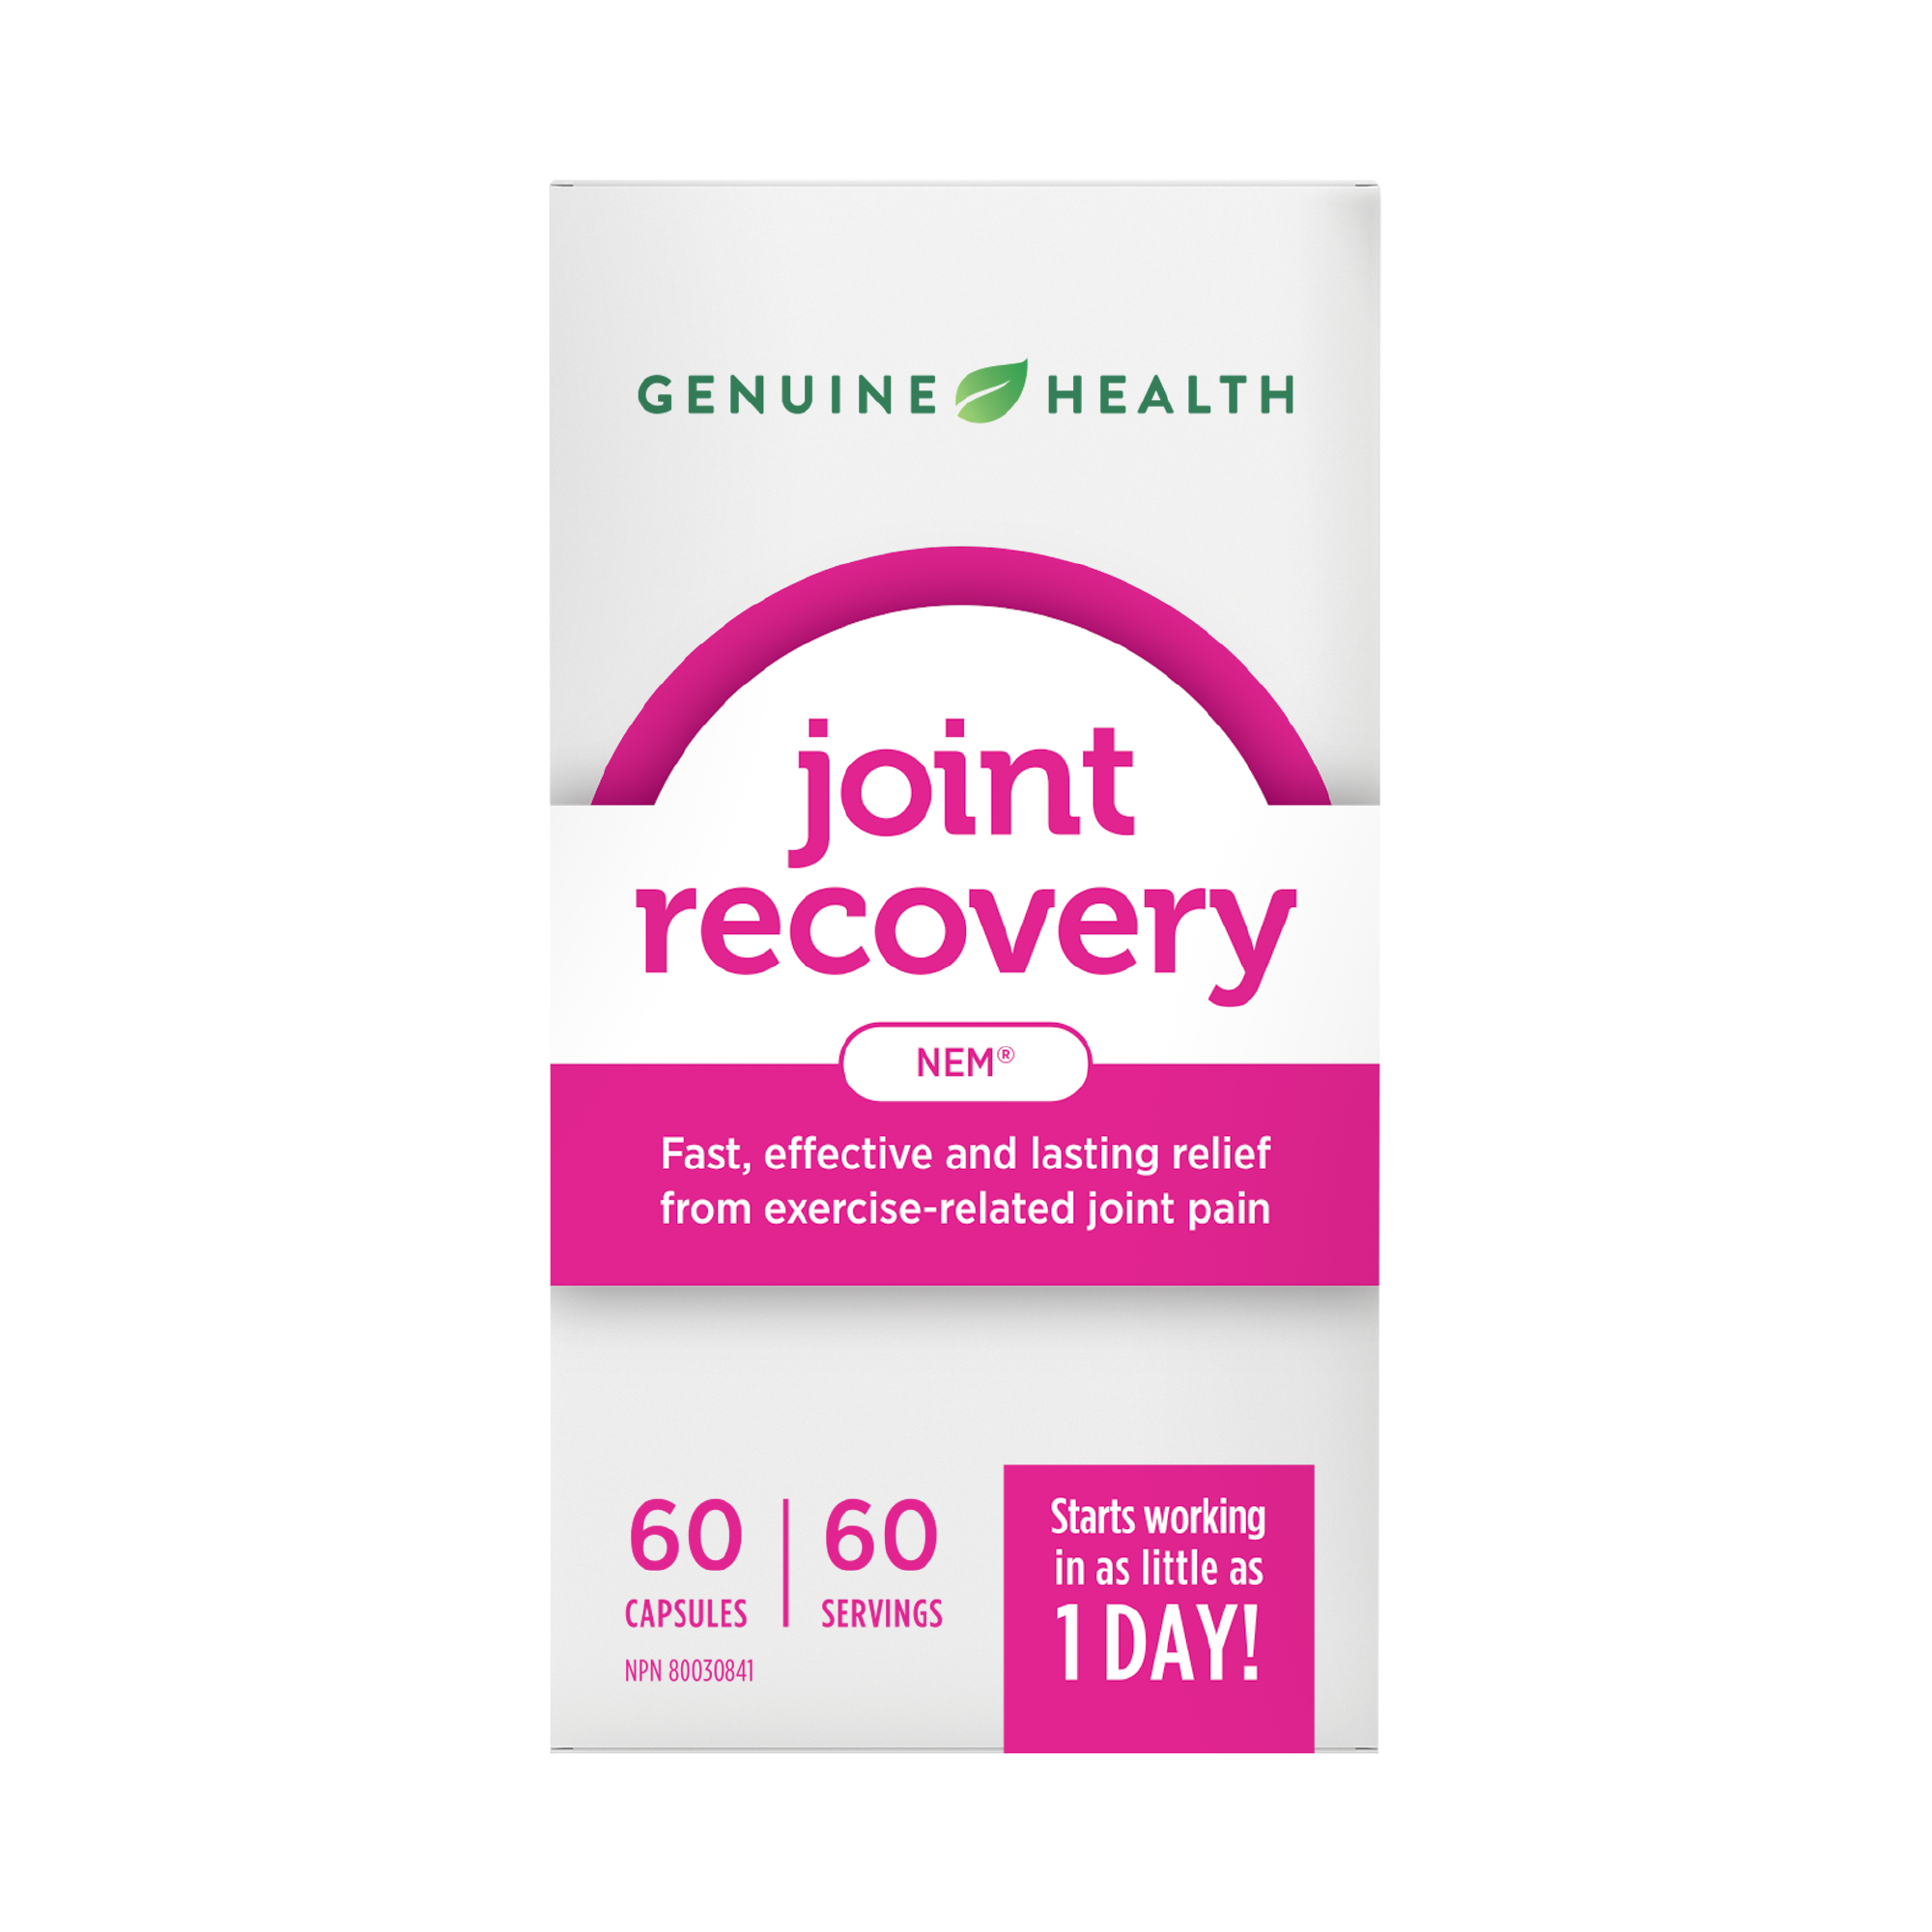 Genuine Health Joint Recovery NEM 60 Capsules